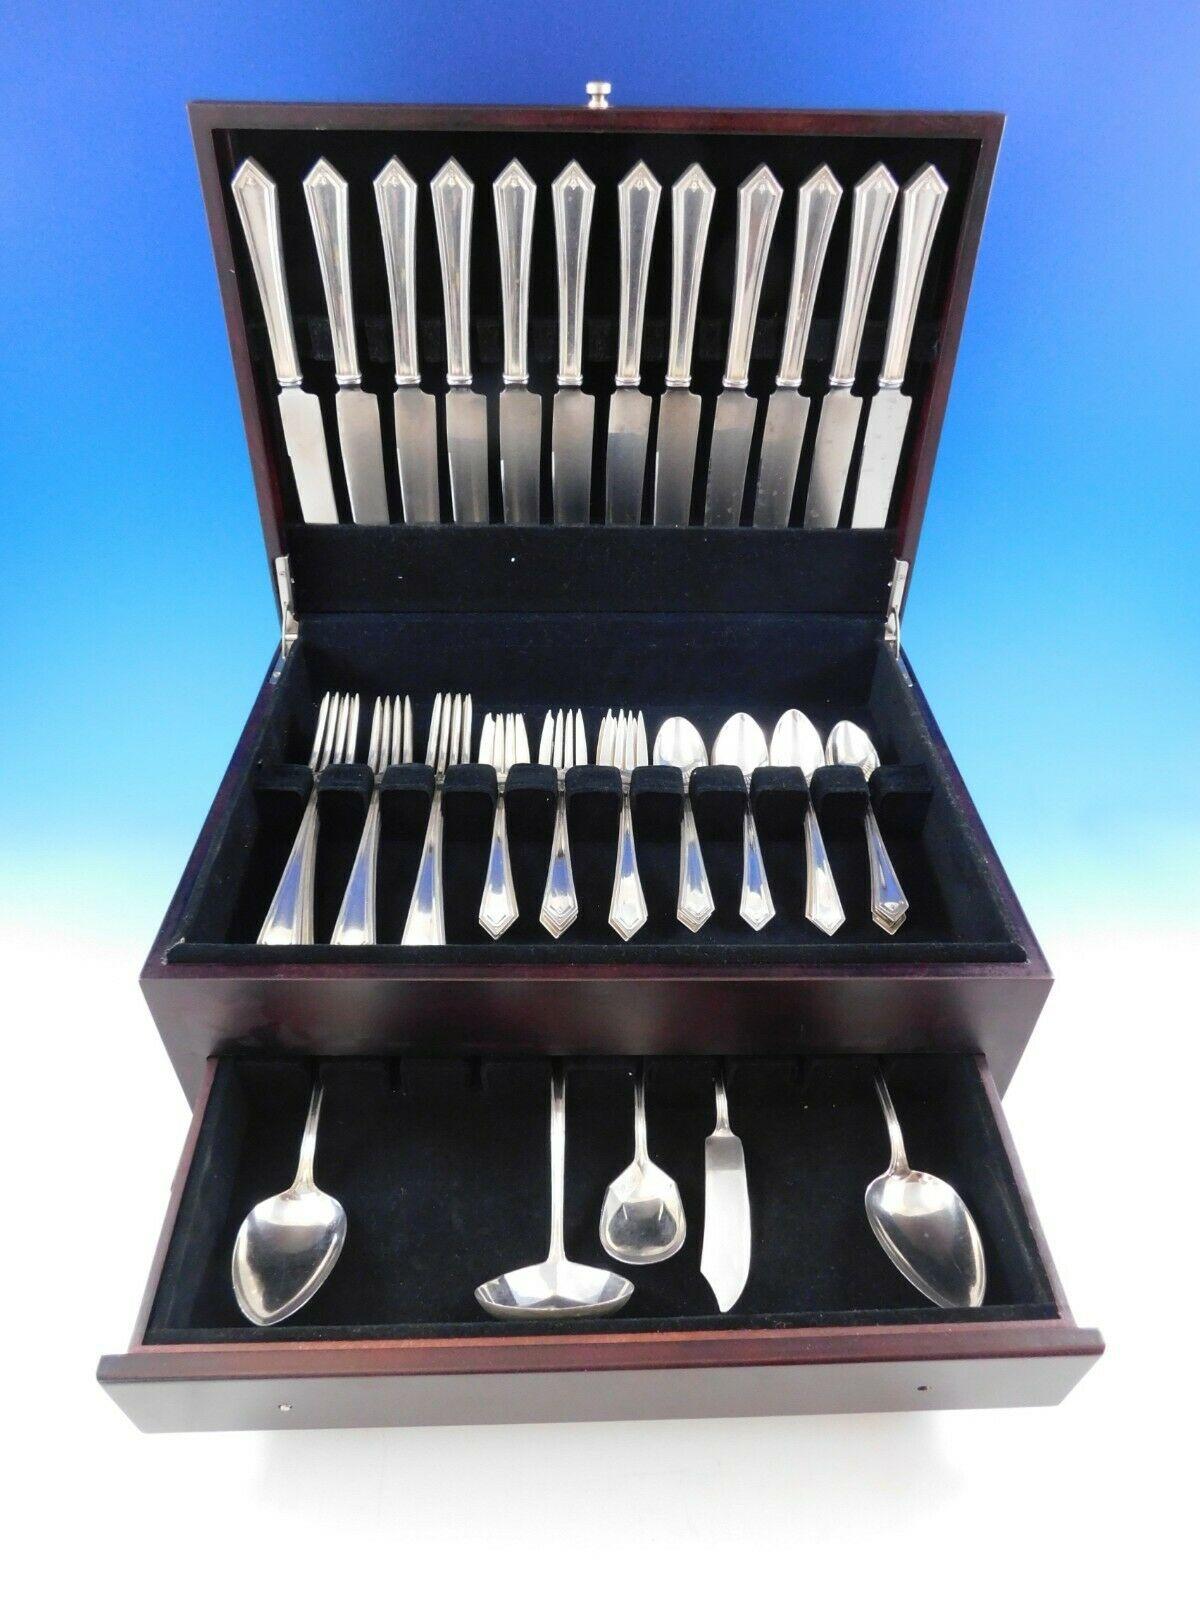 Scarce dinner size Richmond by Alvin, circa 1929, sterling silver flatware set, 53 pieces. This set includes:

12 dinner size knives, 9 3/4